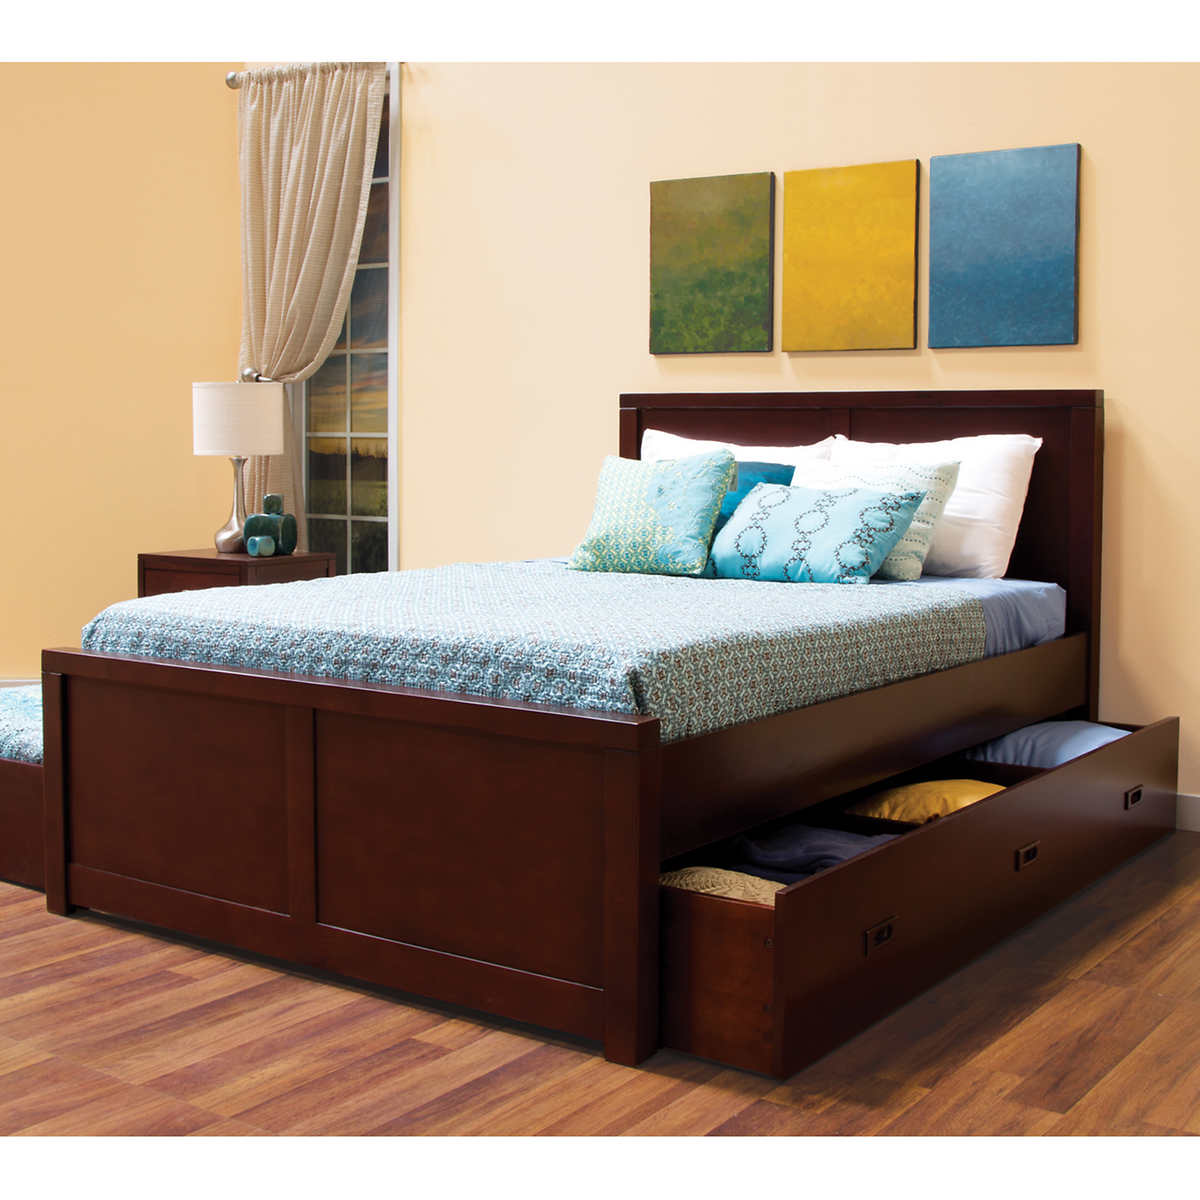 Peyton Full Bed With Trundle And, Full Bed Frame With Storage Underneath